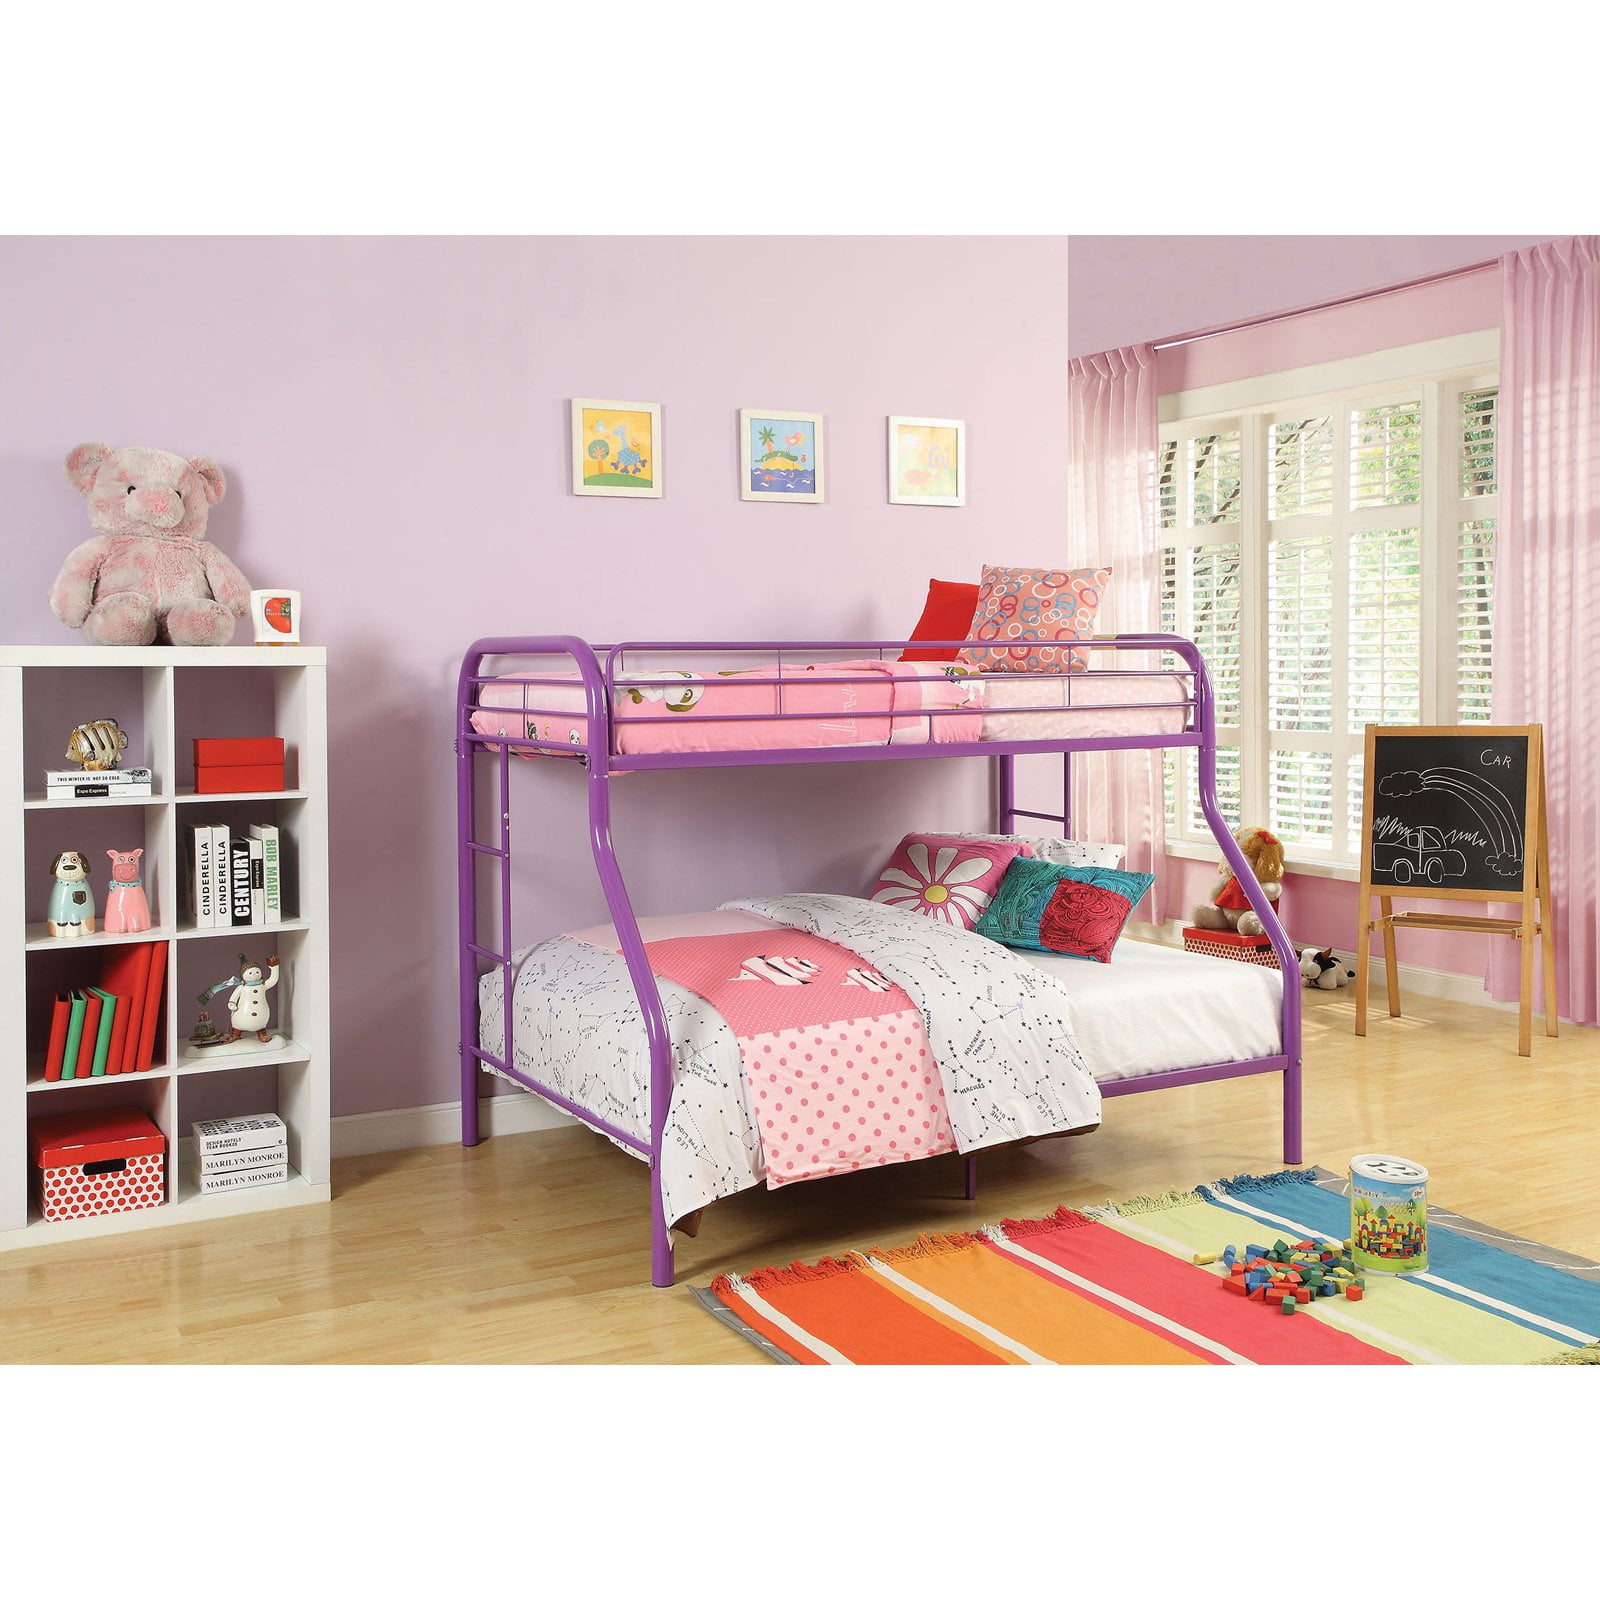 Acme Eclipse Bunk Bed Twin Full In, Cinderella Bunk Bed